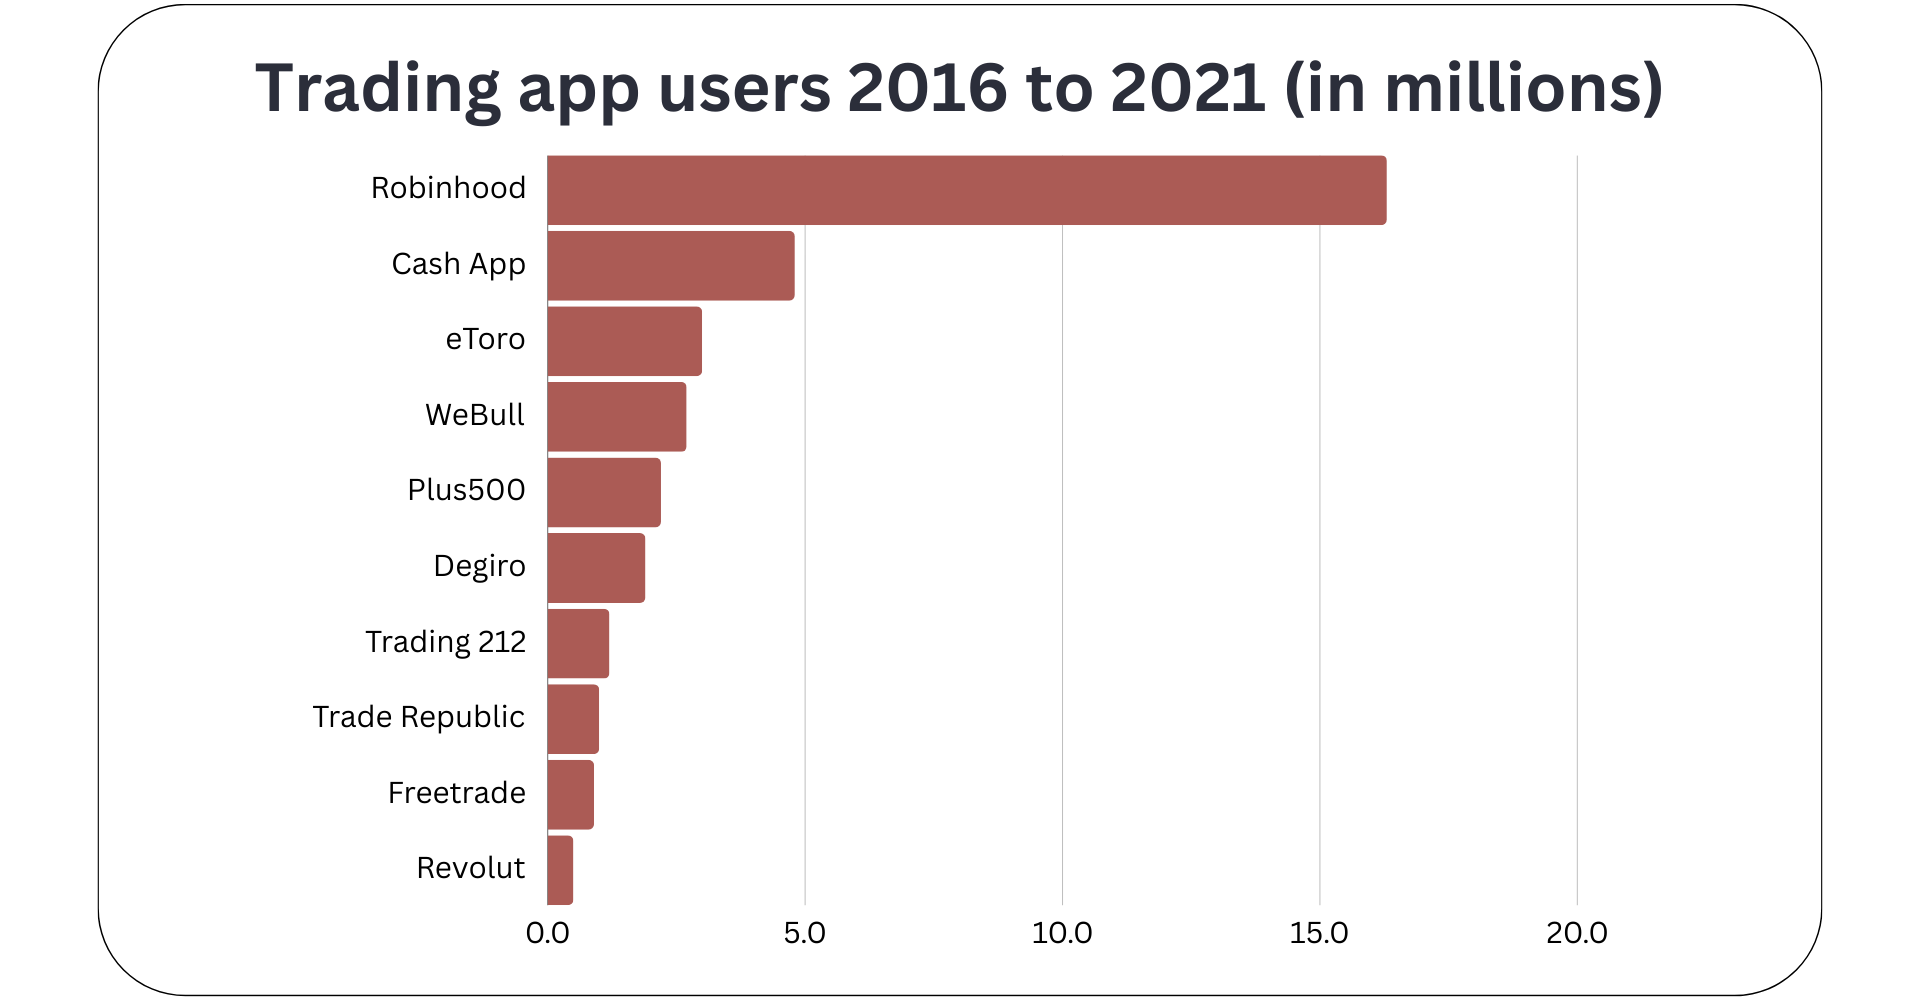 User count of popular trading apps from 2016 to 2021